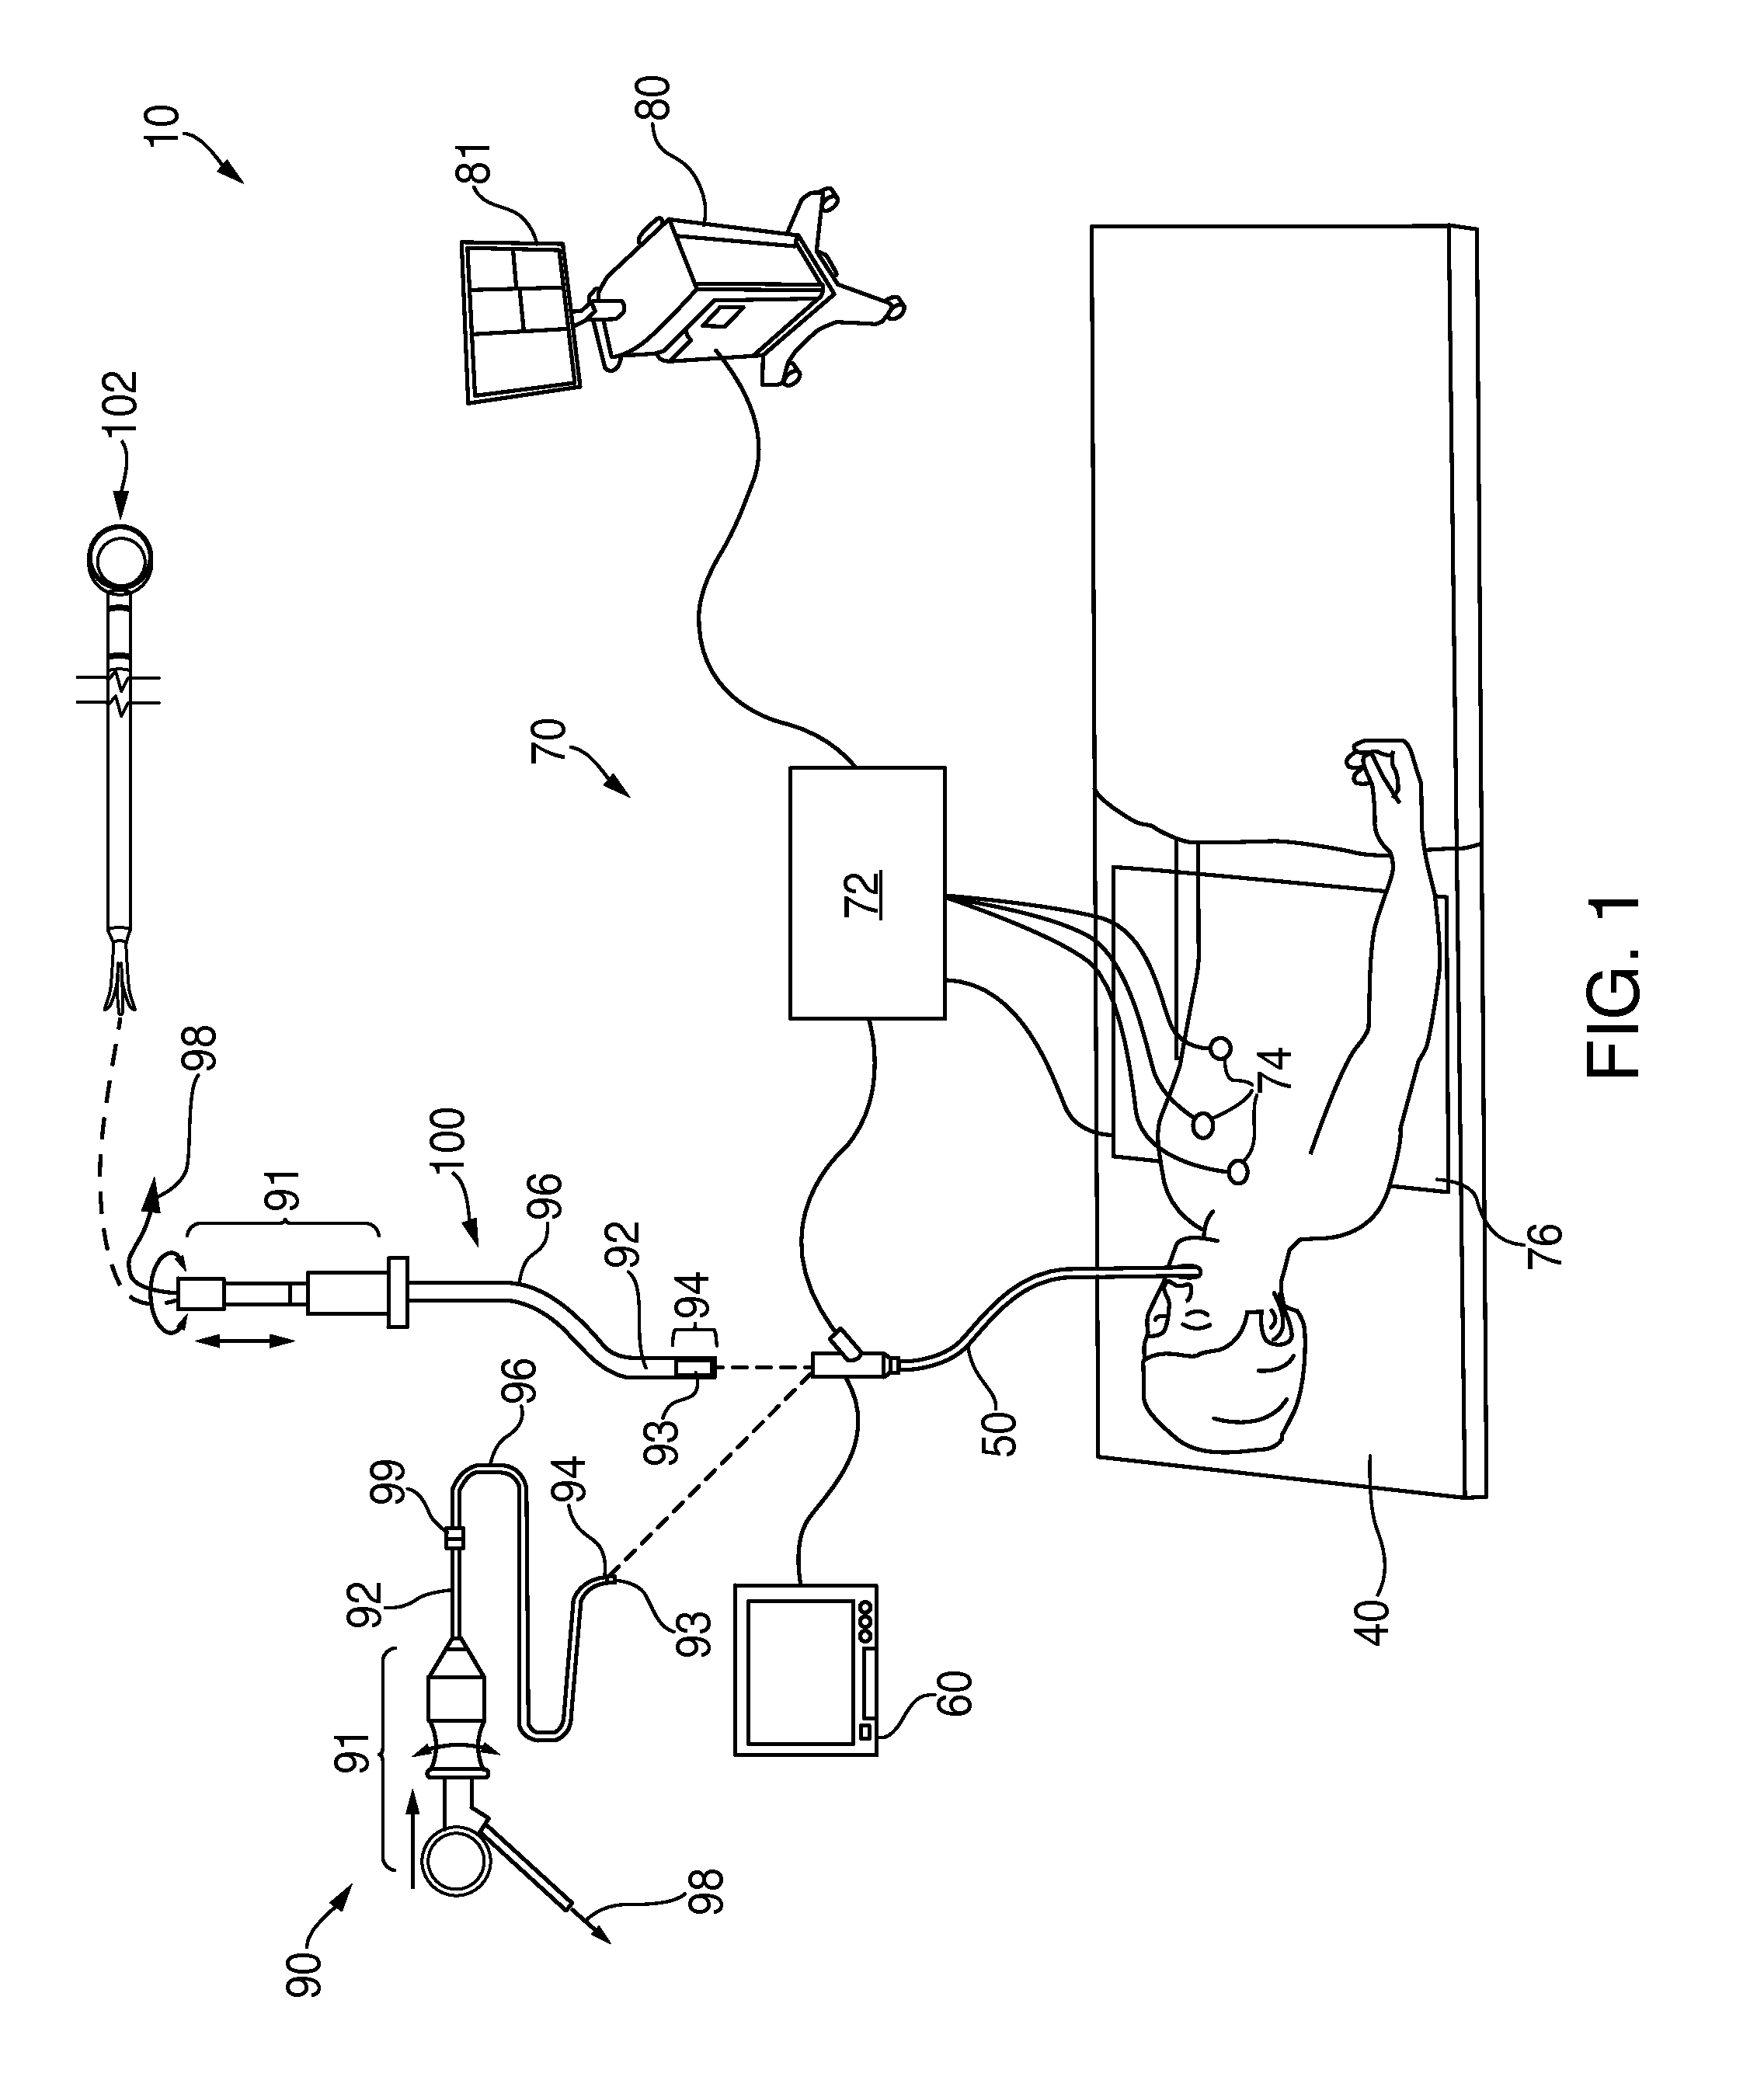 System and method for navigating within the lung